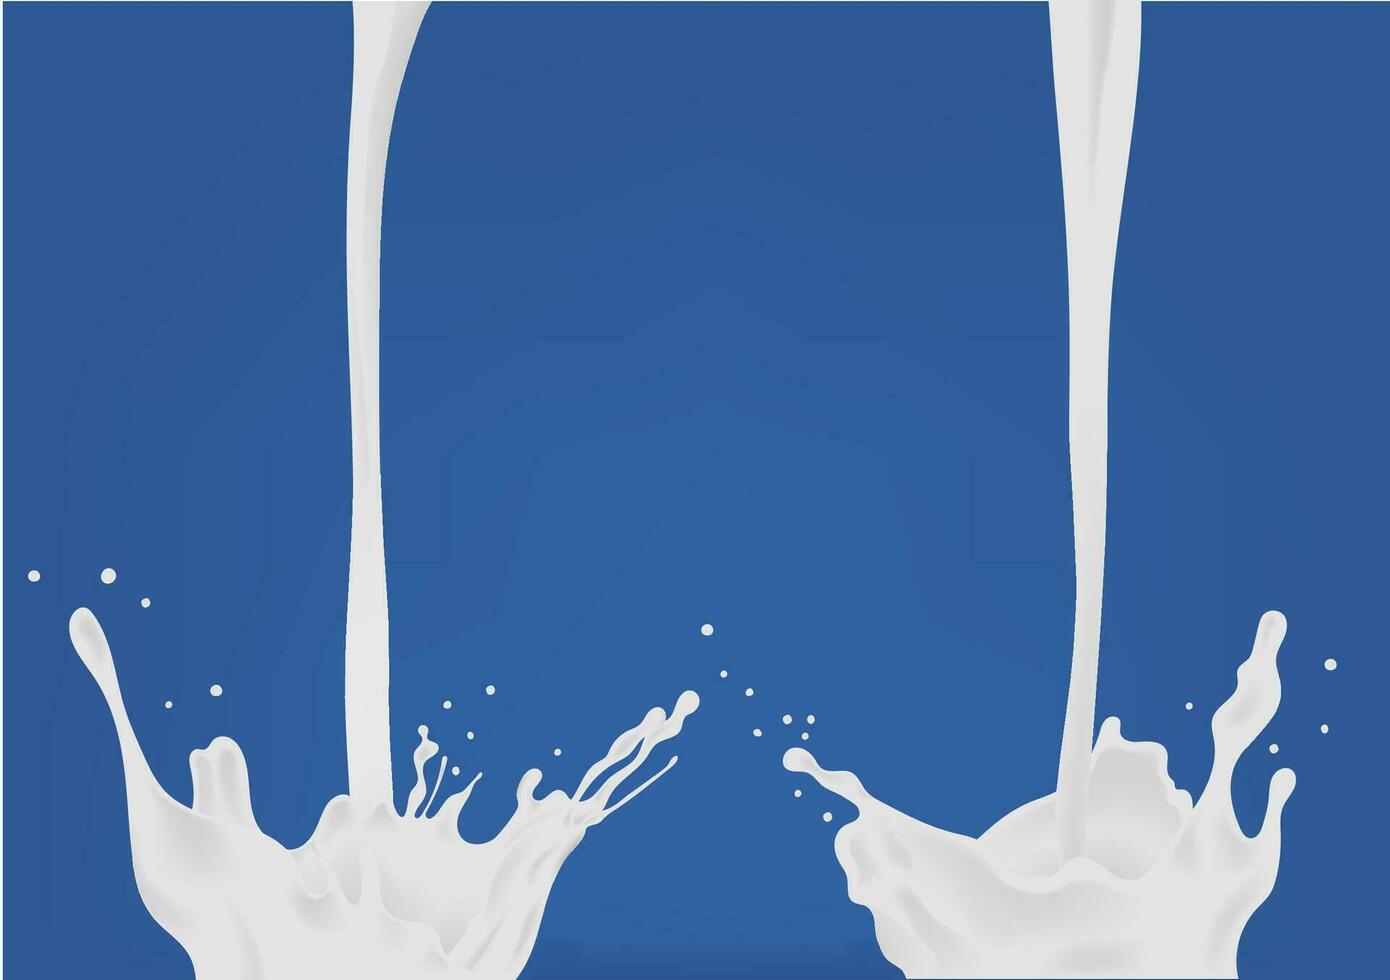 Pouring milk. Two white flow and splash. Colorful realistic vector illustration on blue background.